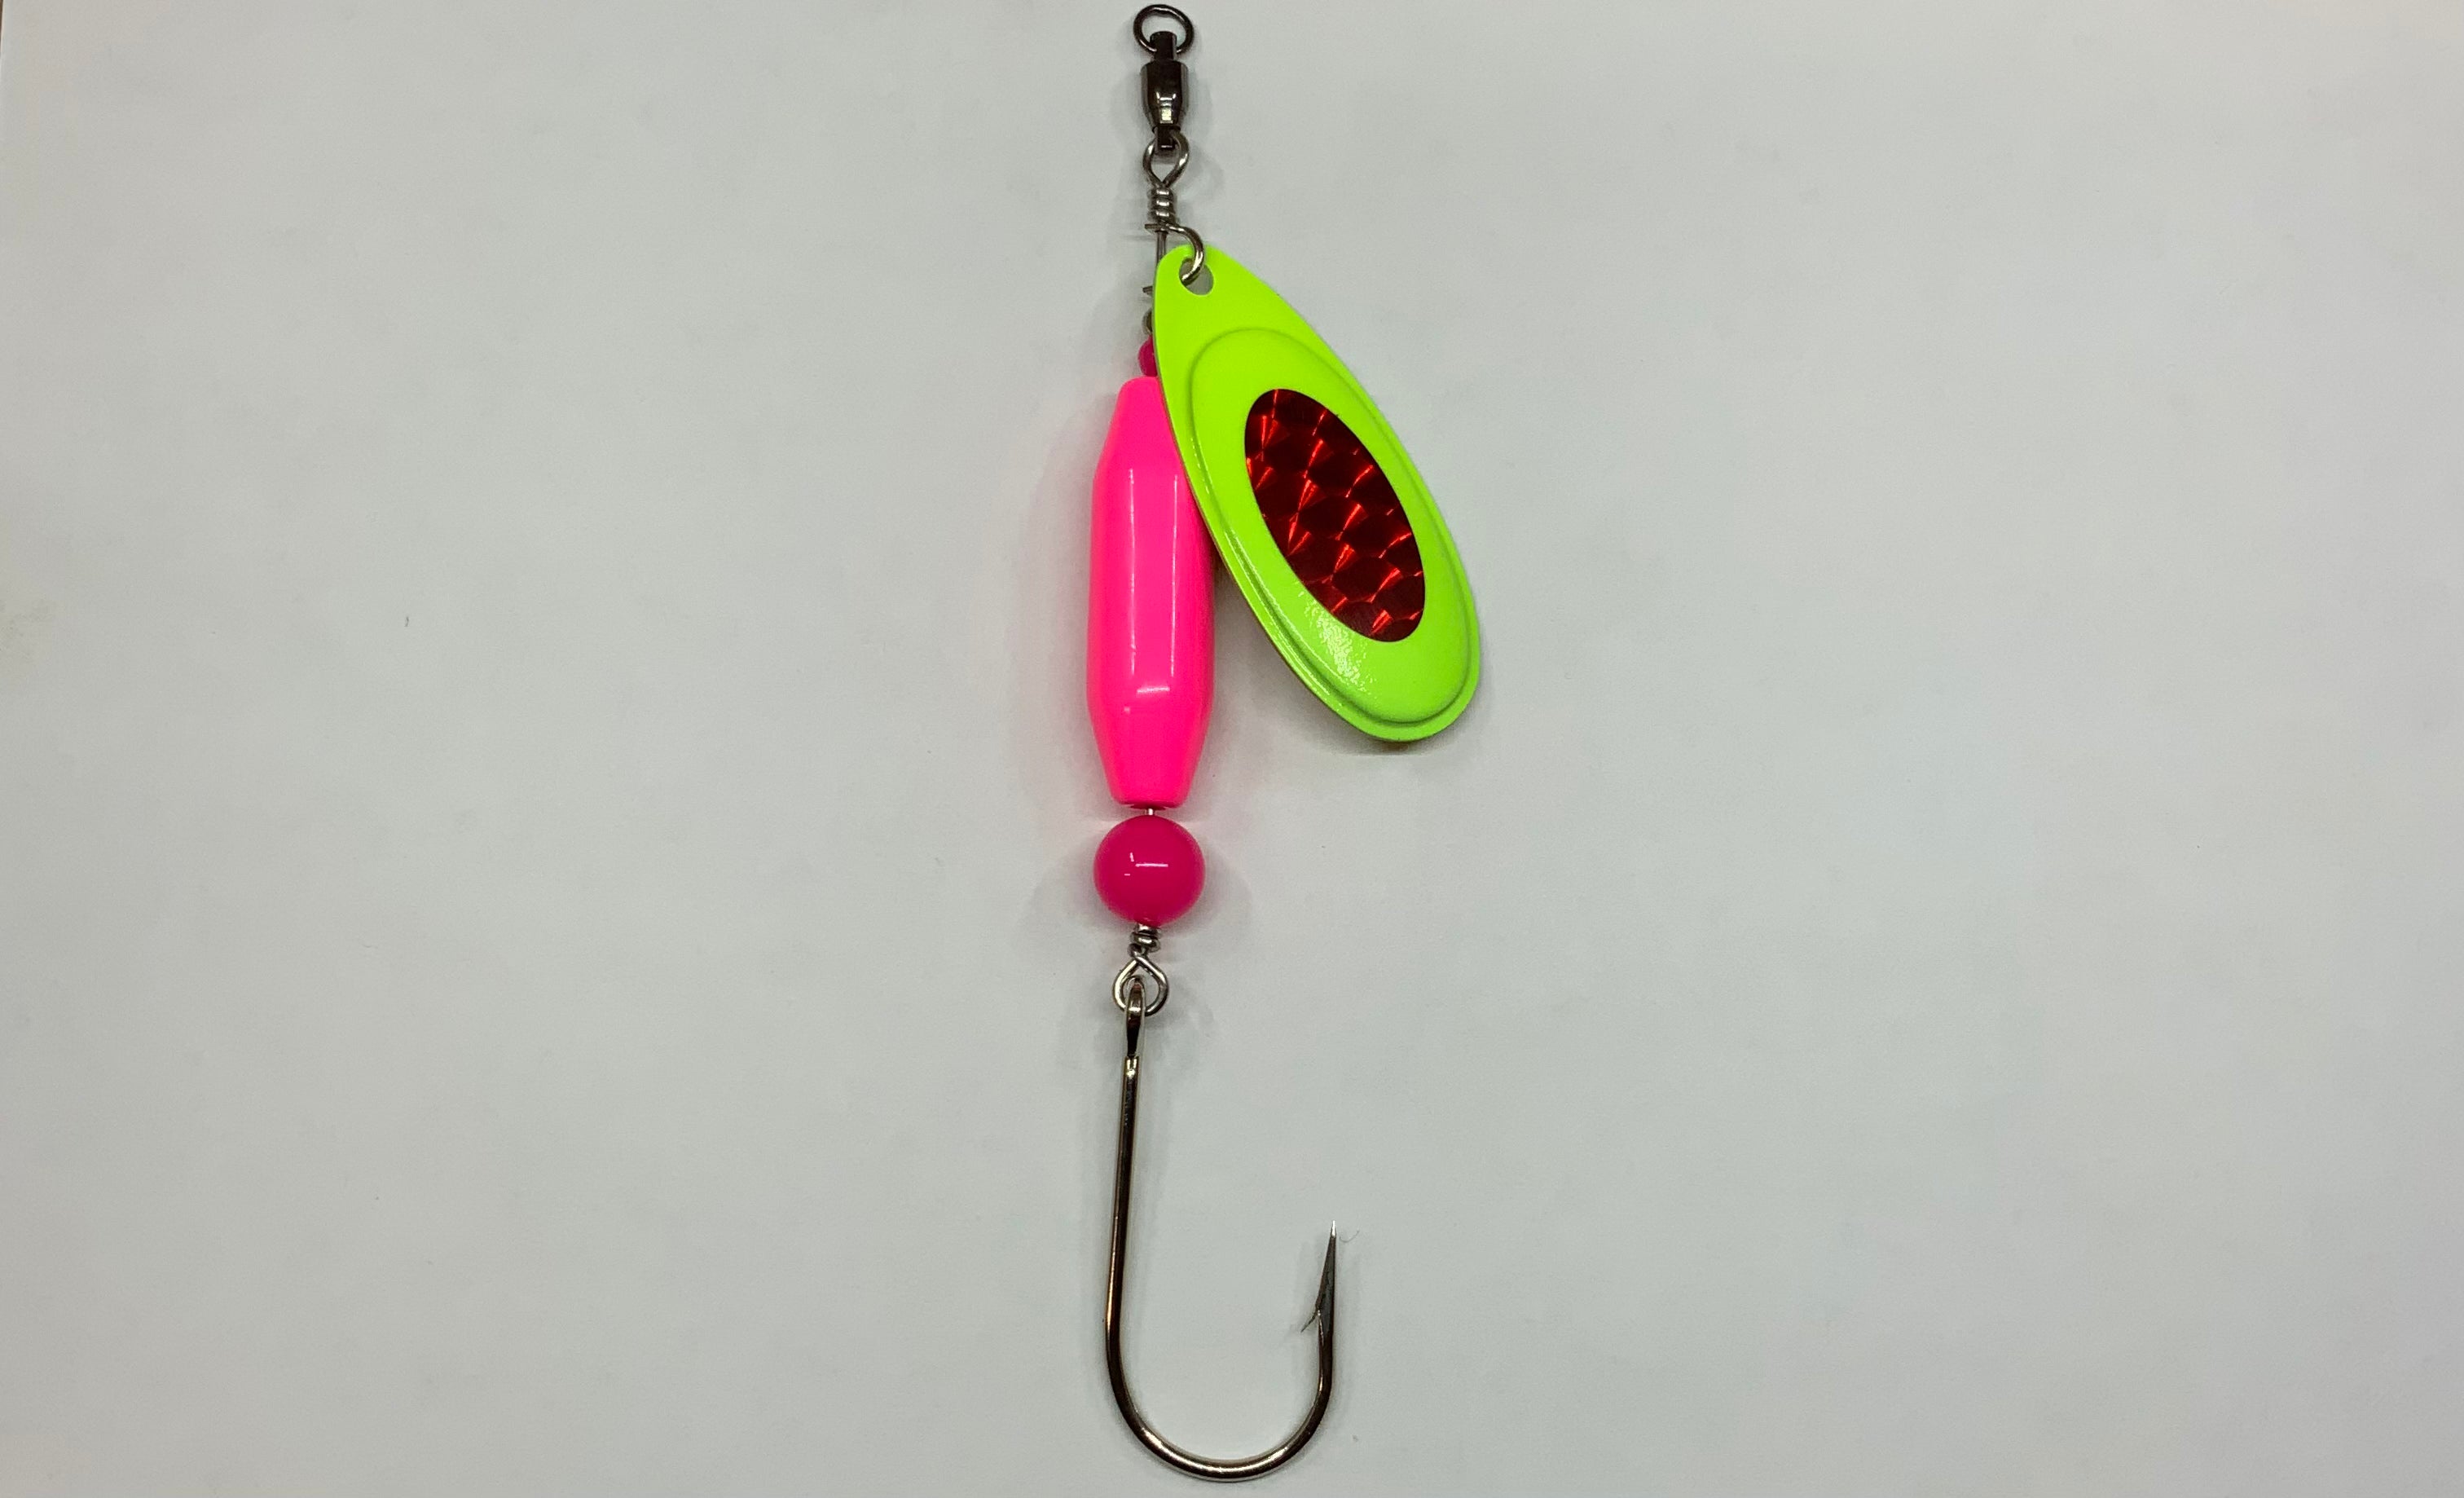 1oz, Premium Cotton Candy Ripper, 10.00$, Spin-X Designs Tackle, Fishing  Lure